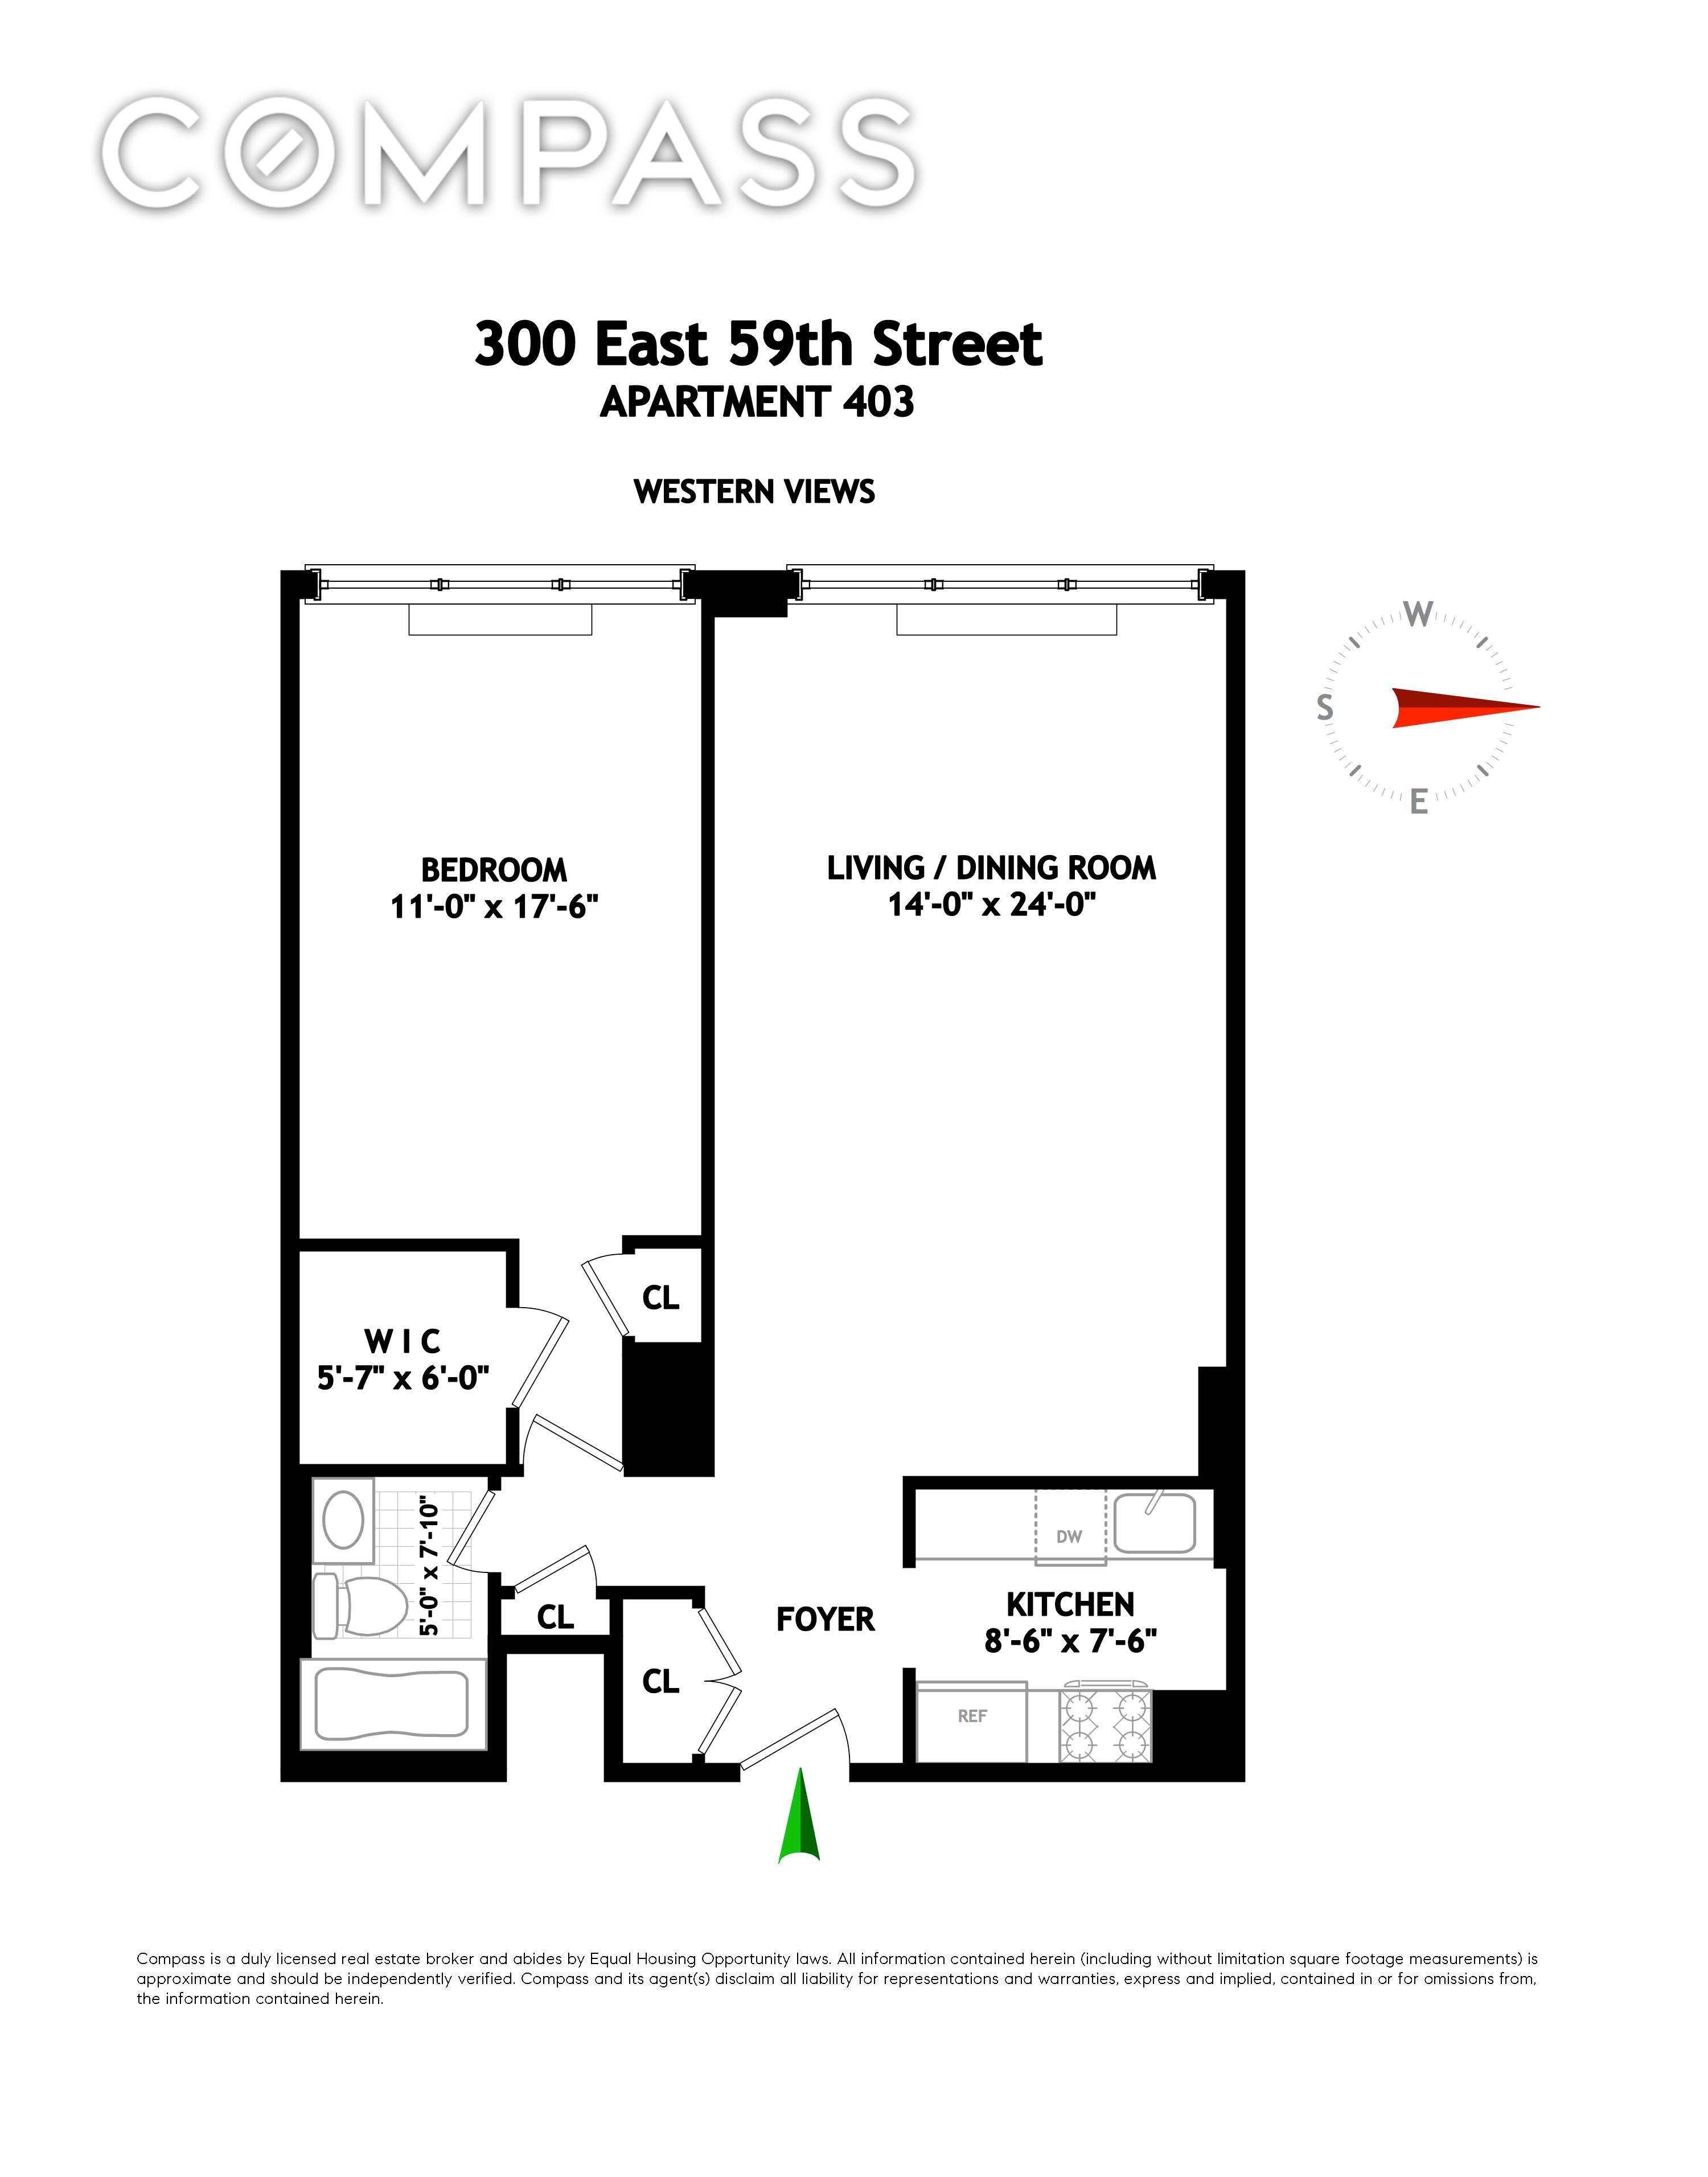 300 East 59th Street 403 Sutton Place New York NY 10022